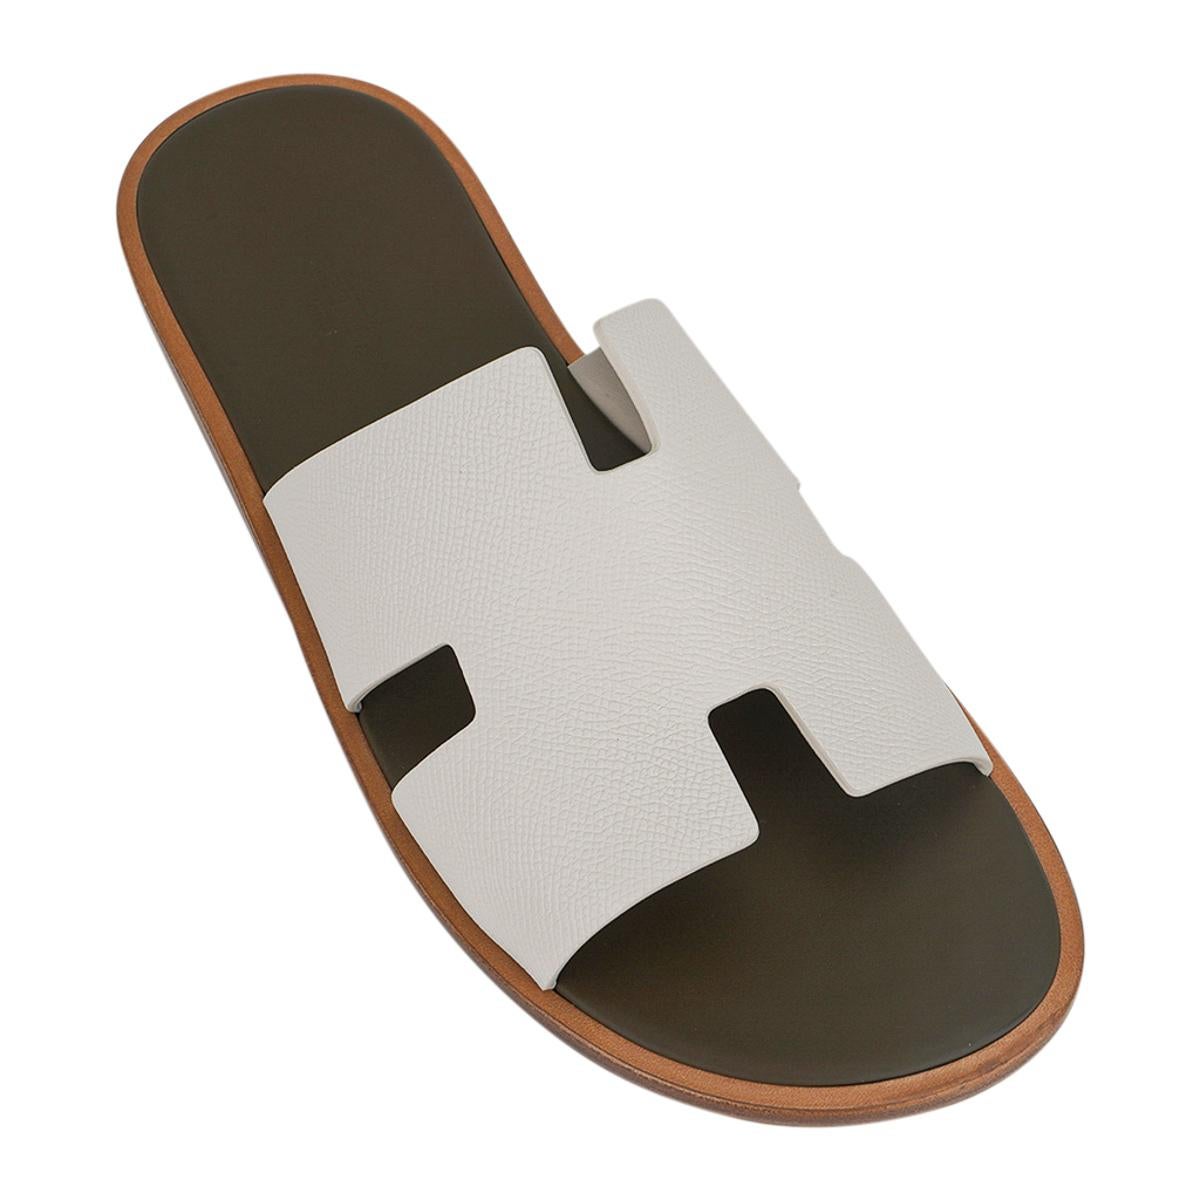 Mightychic offers a pair of  Hermes Men's Izmir sandals featured in Beige Glaise and Vert Toundre.
The iconic H cutout over the top of the foot in Epsom leather.
Sophisticated colours in a silhouette that works for every wardrobe.
Insole is Vert